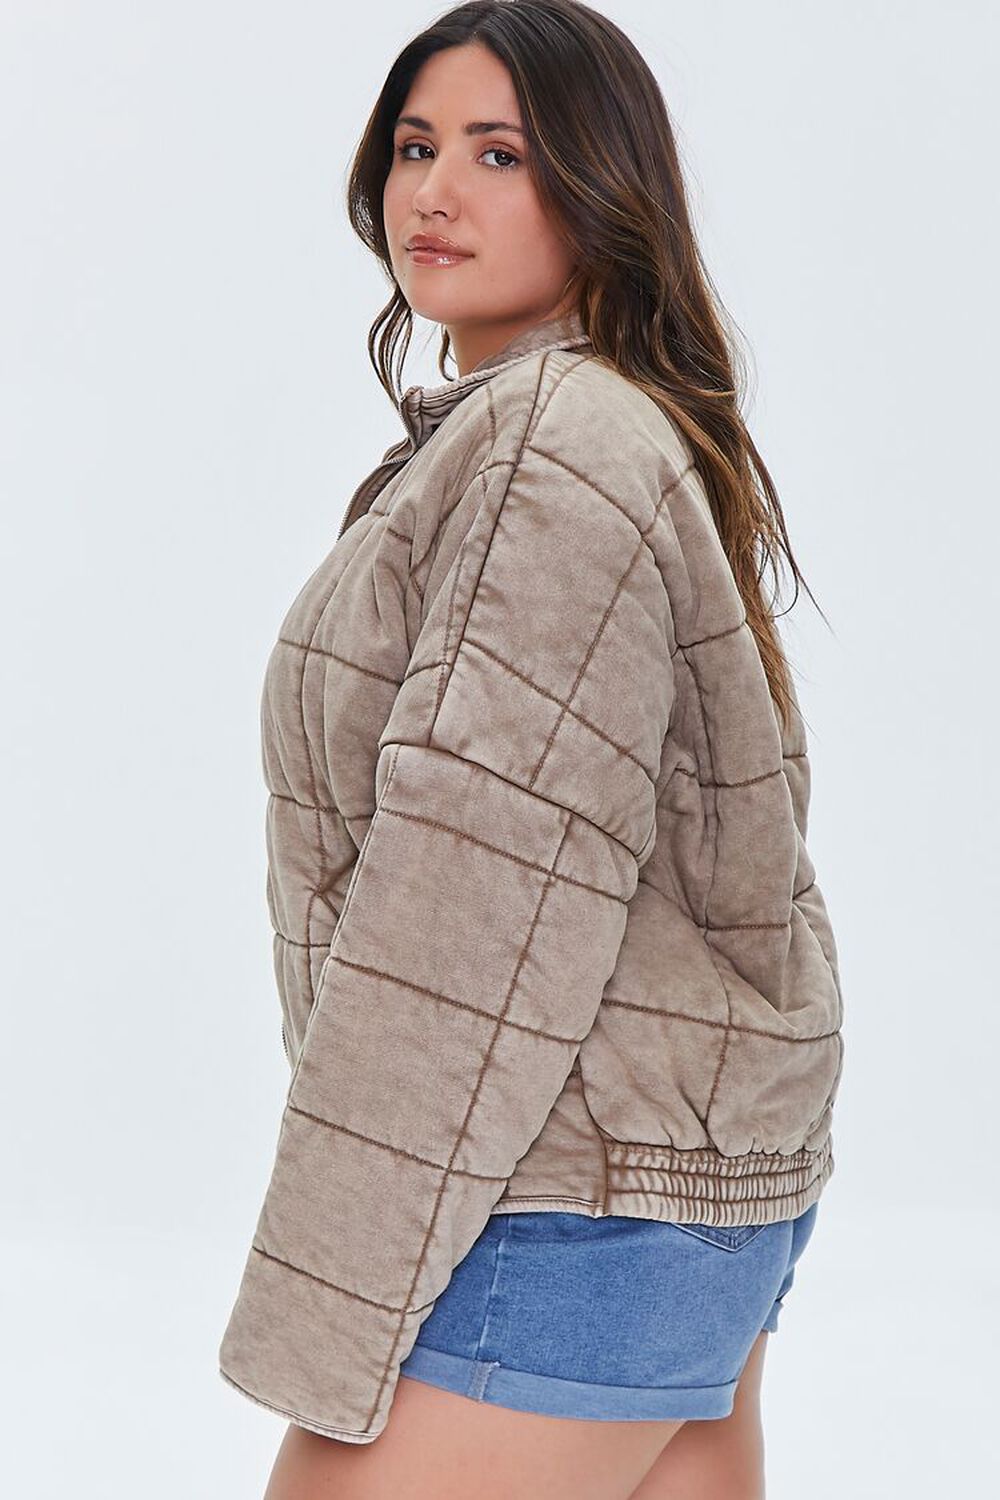 BROWN Plus Size Quilted Jacket, image 3